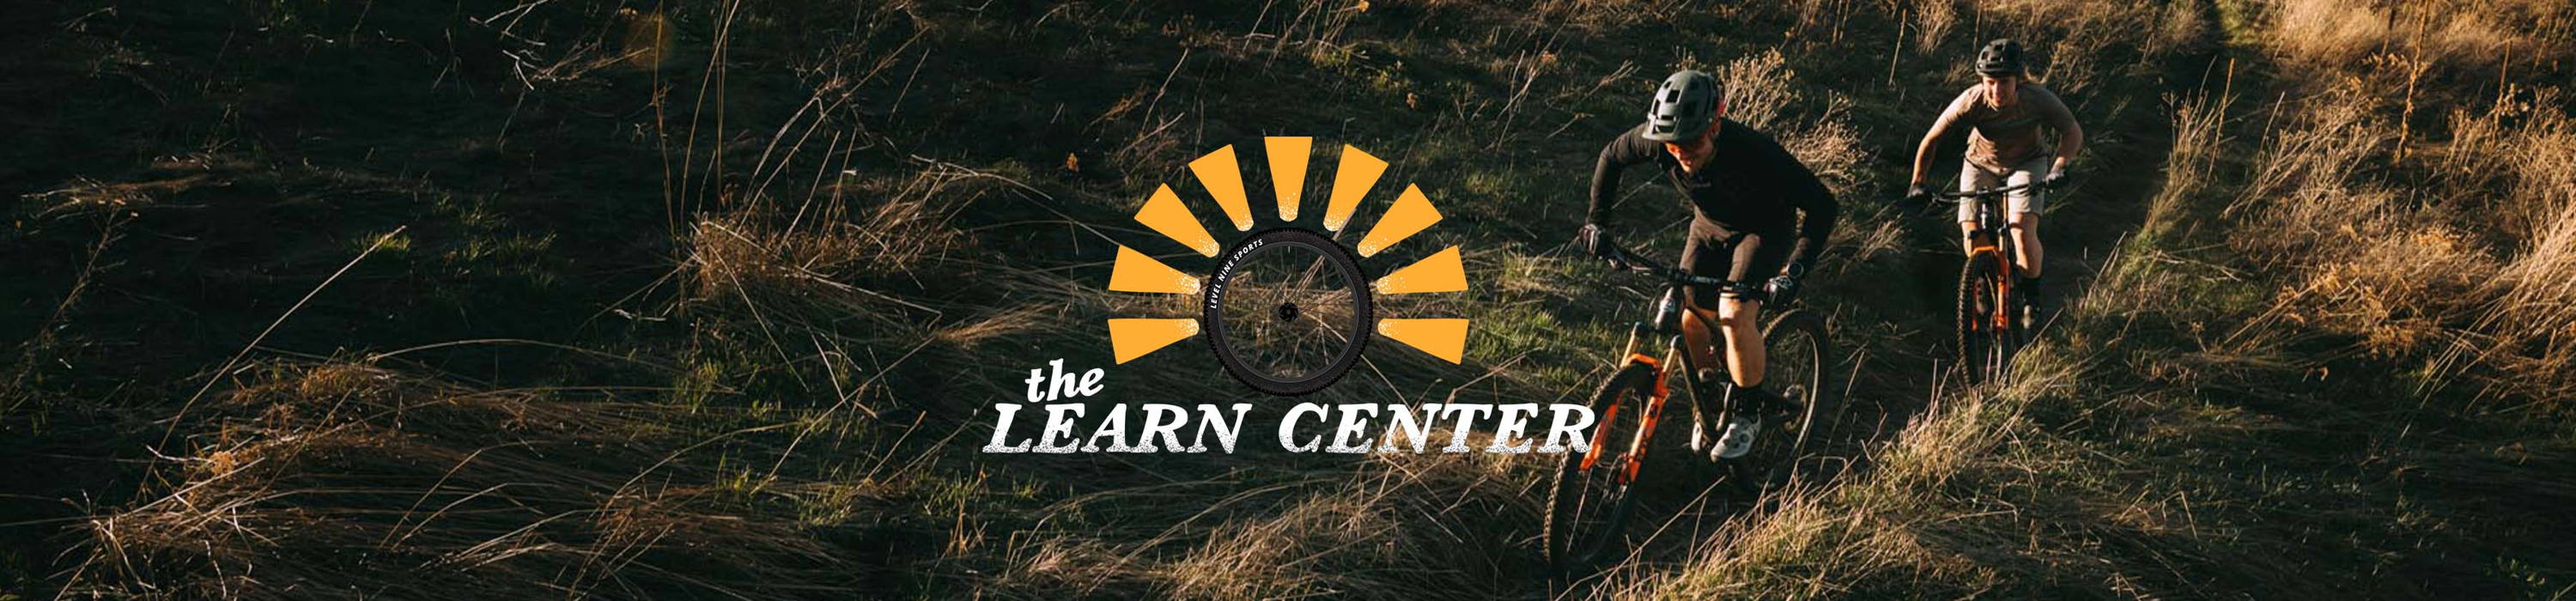 the learn center